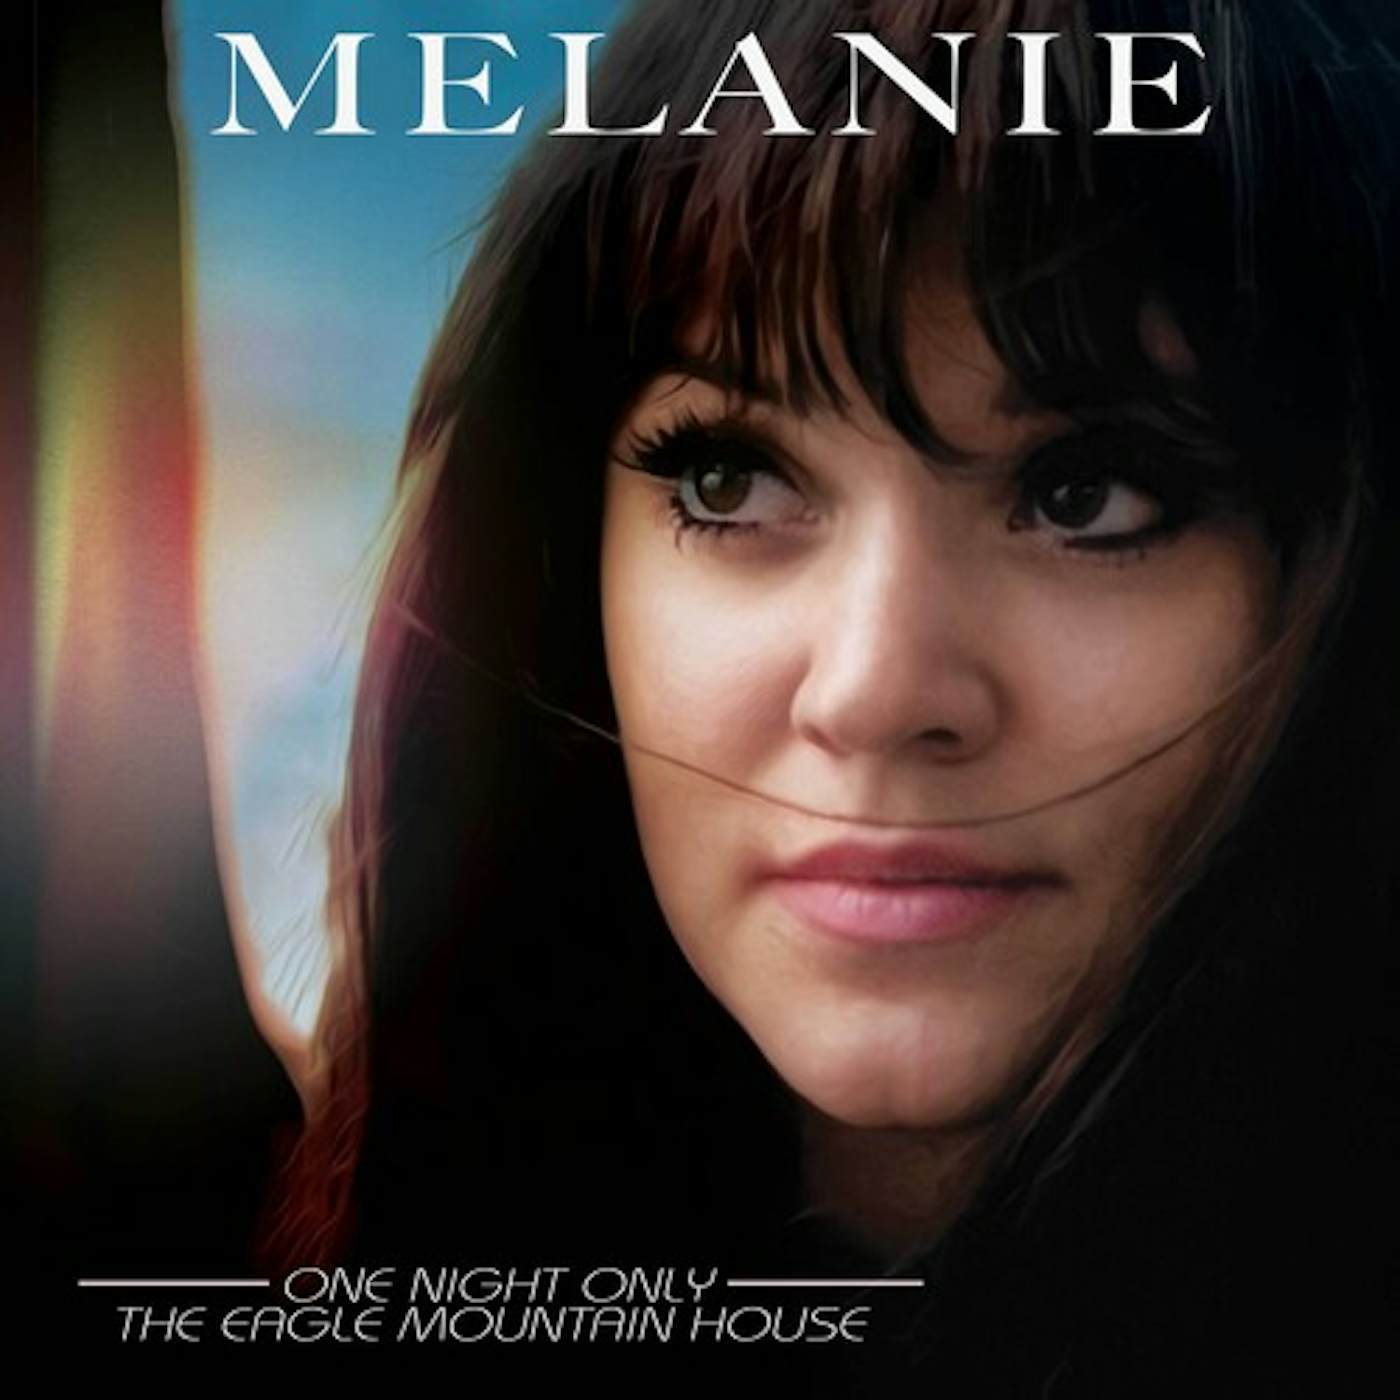 Melanie ONE NIGHT ONLY - THE EAGLE MOUNTAIN HOUSE CD